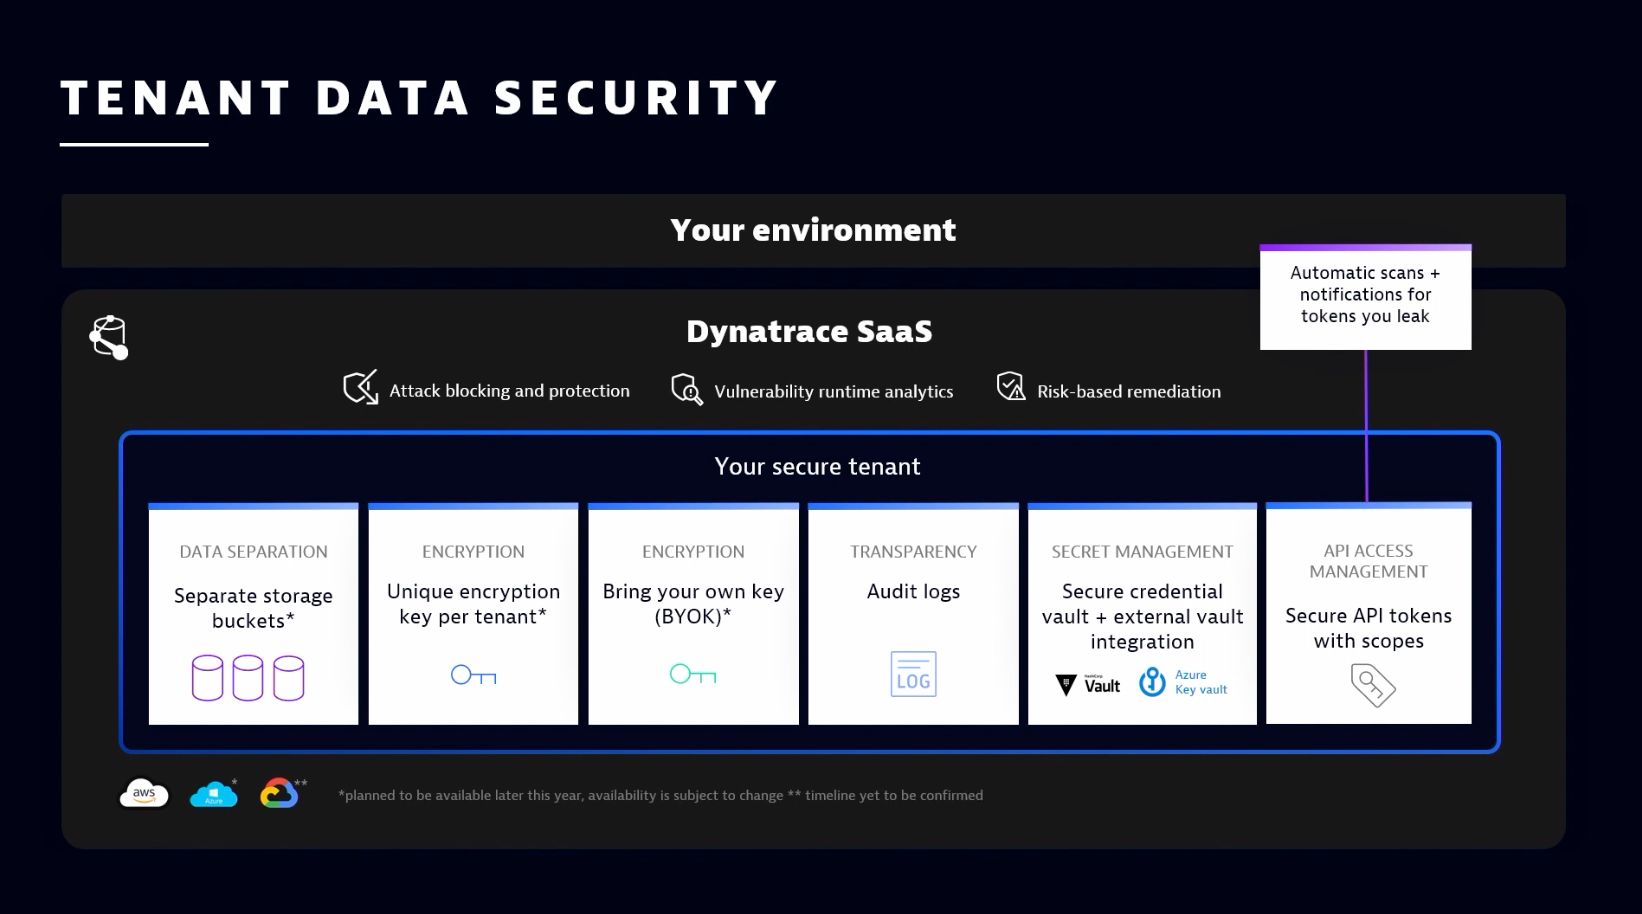 Data privacy by design: Dynatrace tenant data security